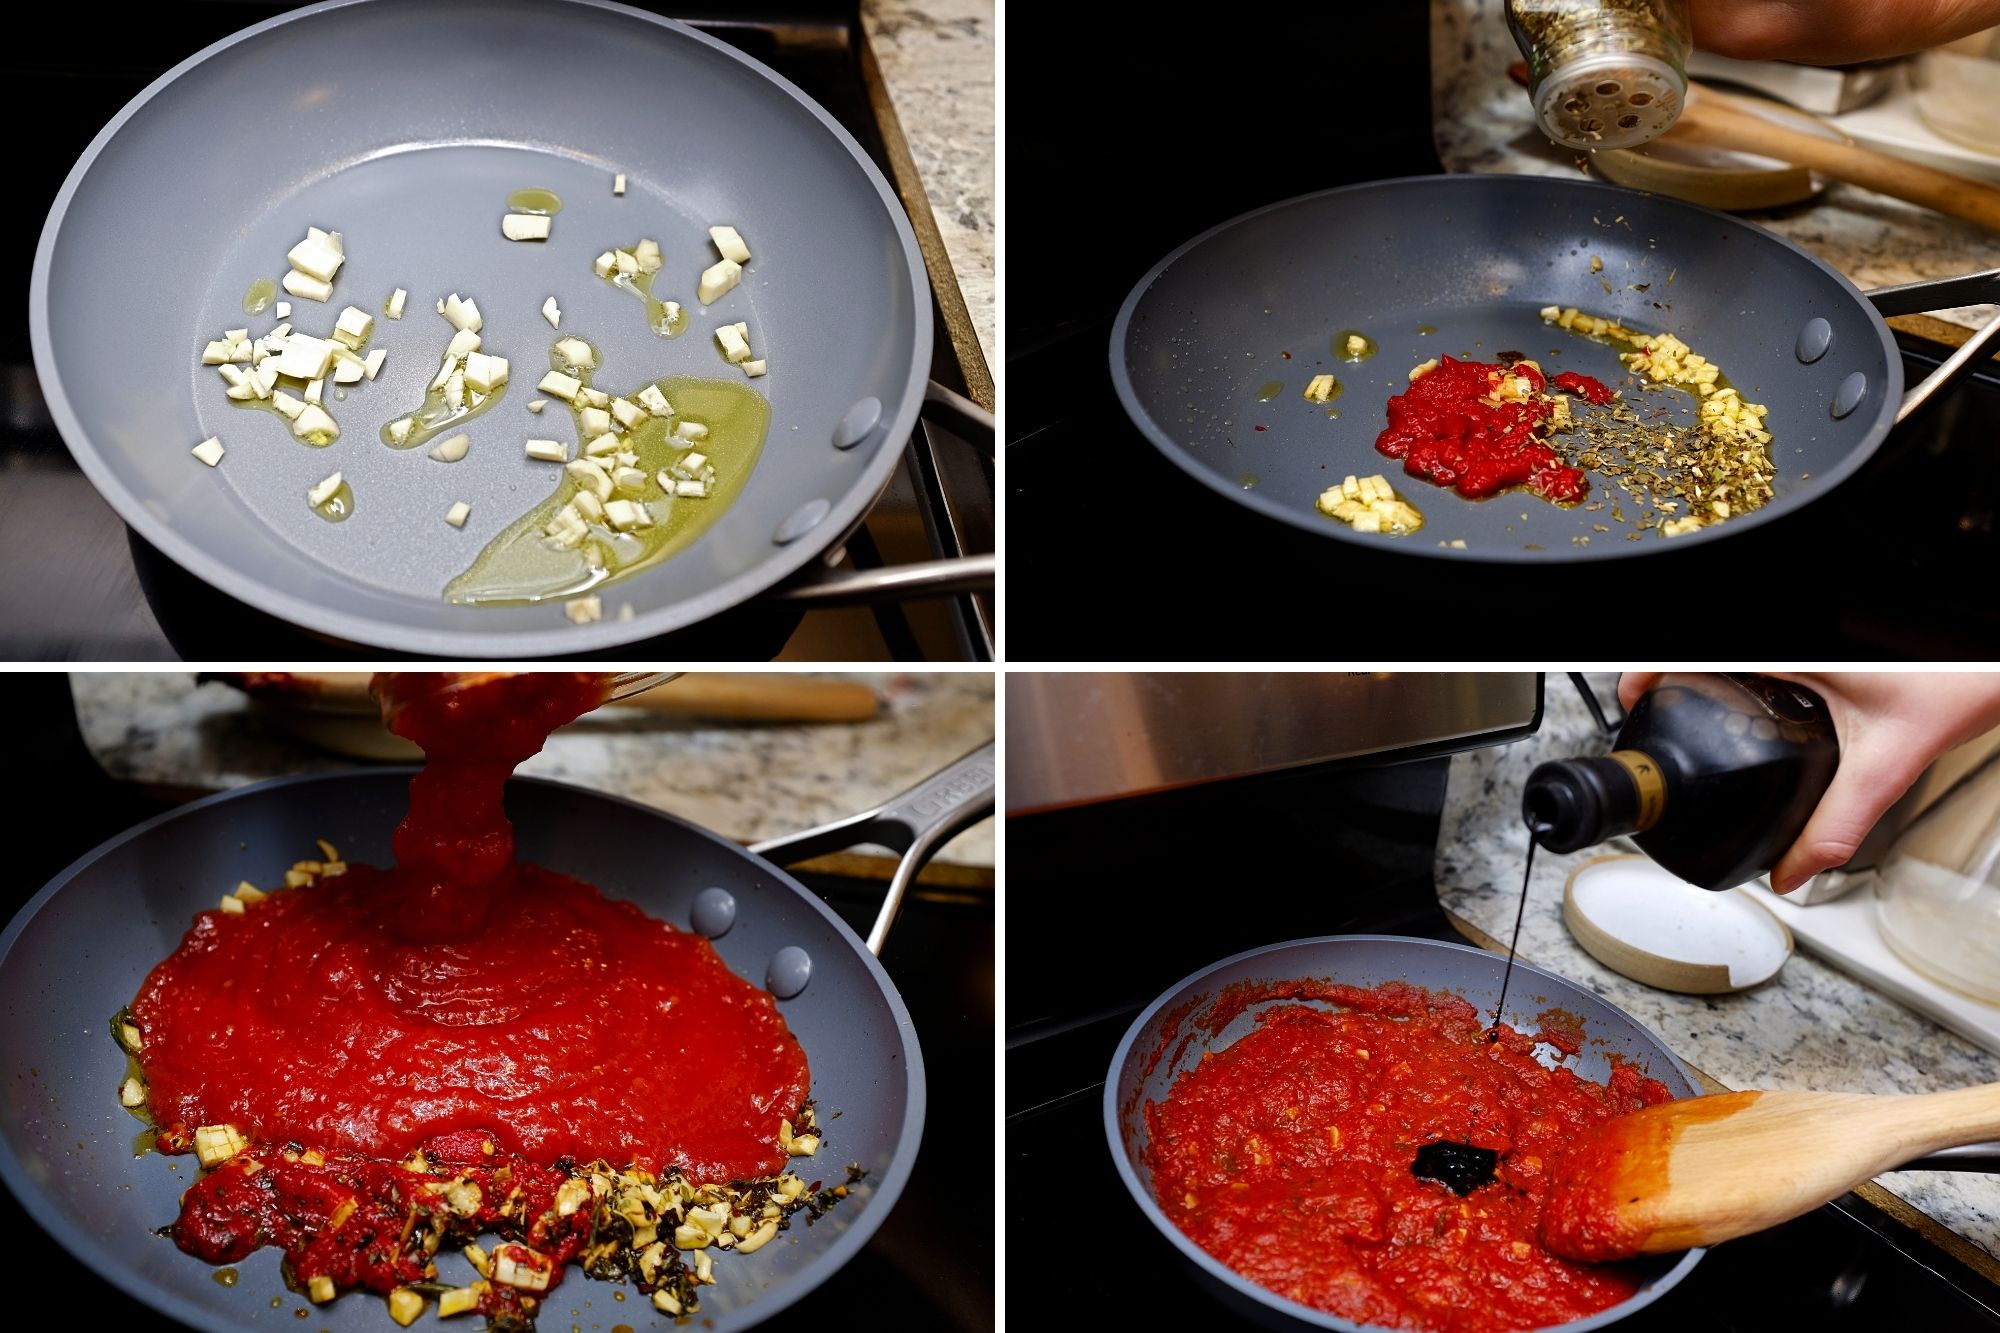 the steps of the sauce: saute garlic, add tomato paste and herbs, add tomatoes, add vinegar